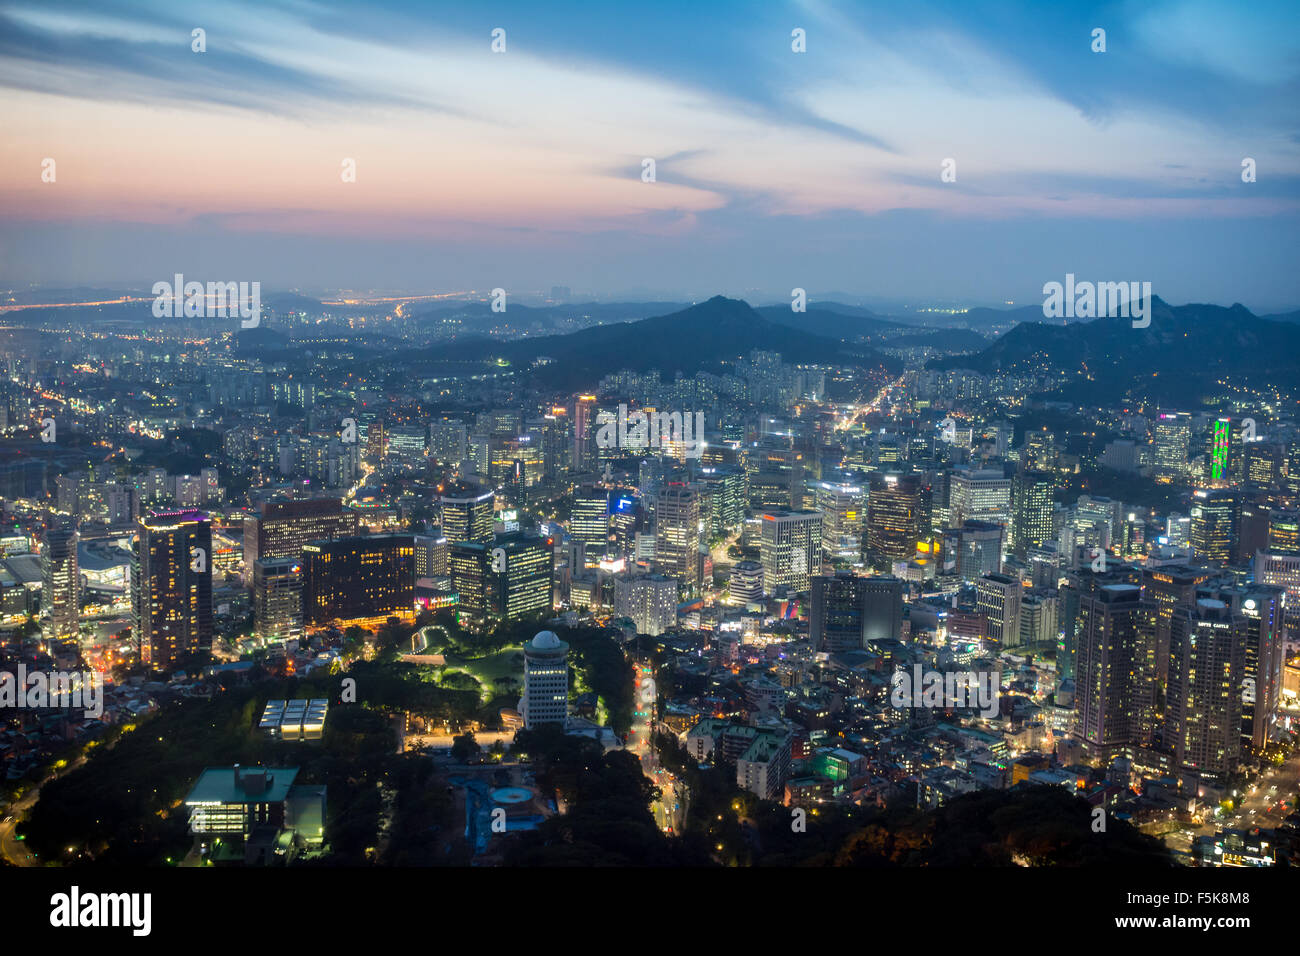 View over Seoul at night from the N Tower. Stock Photo